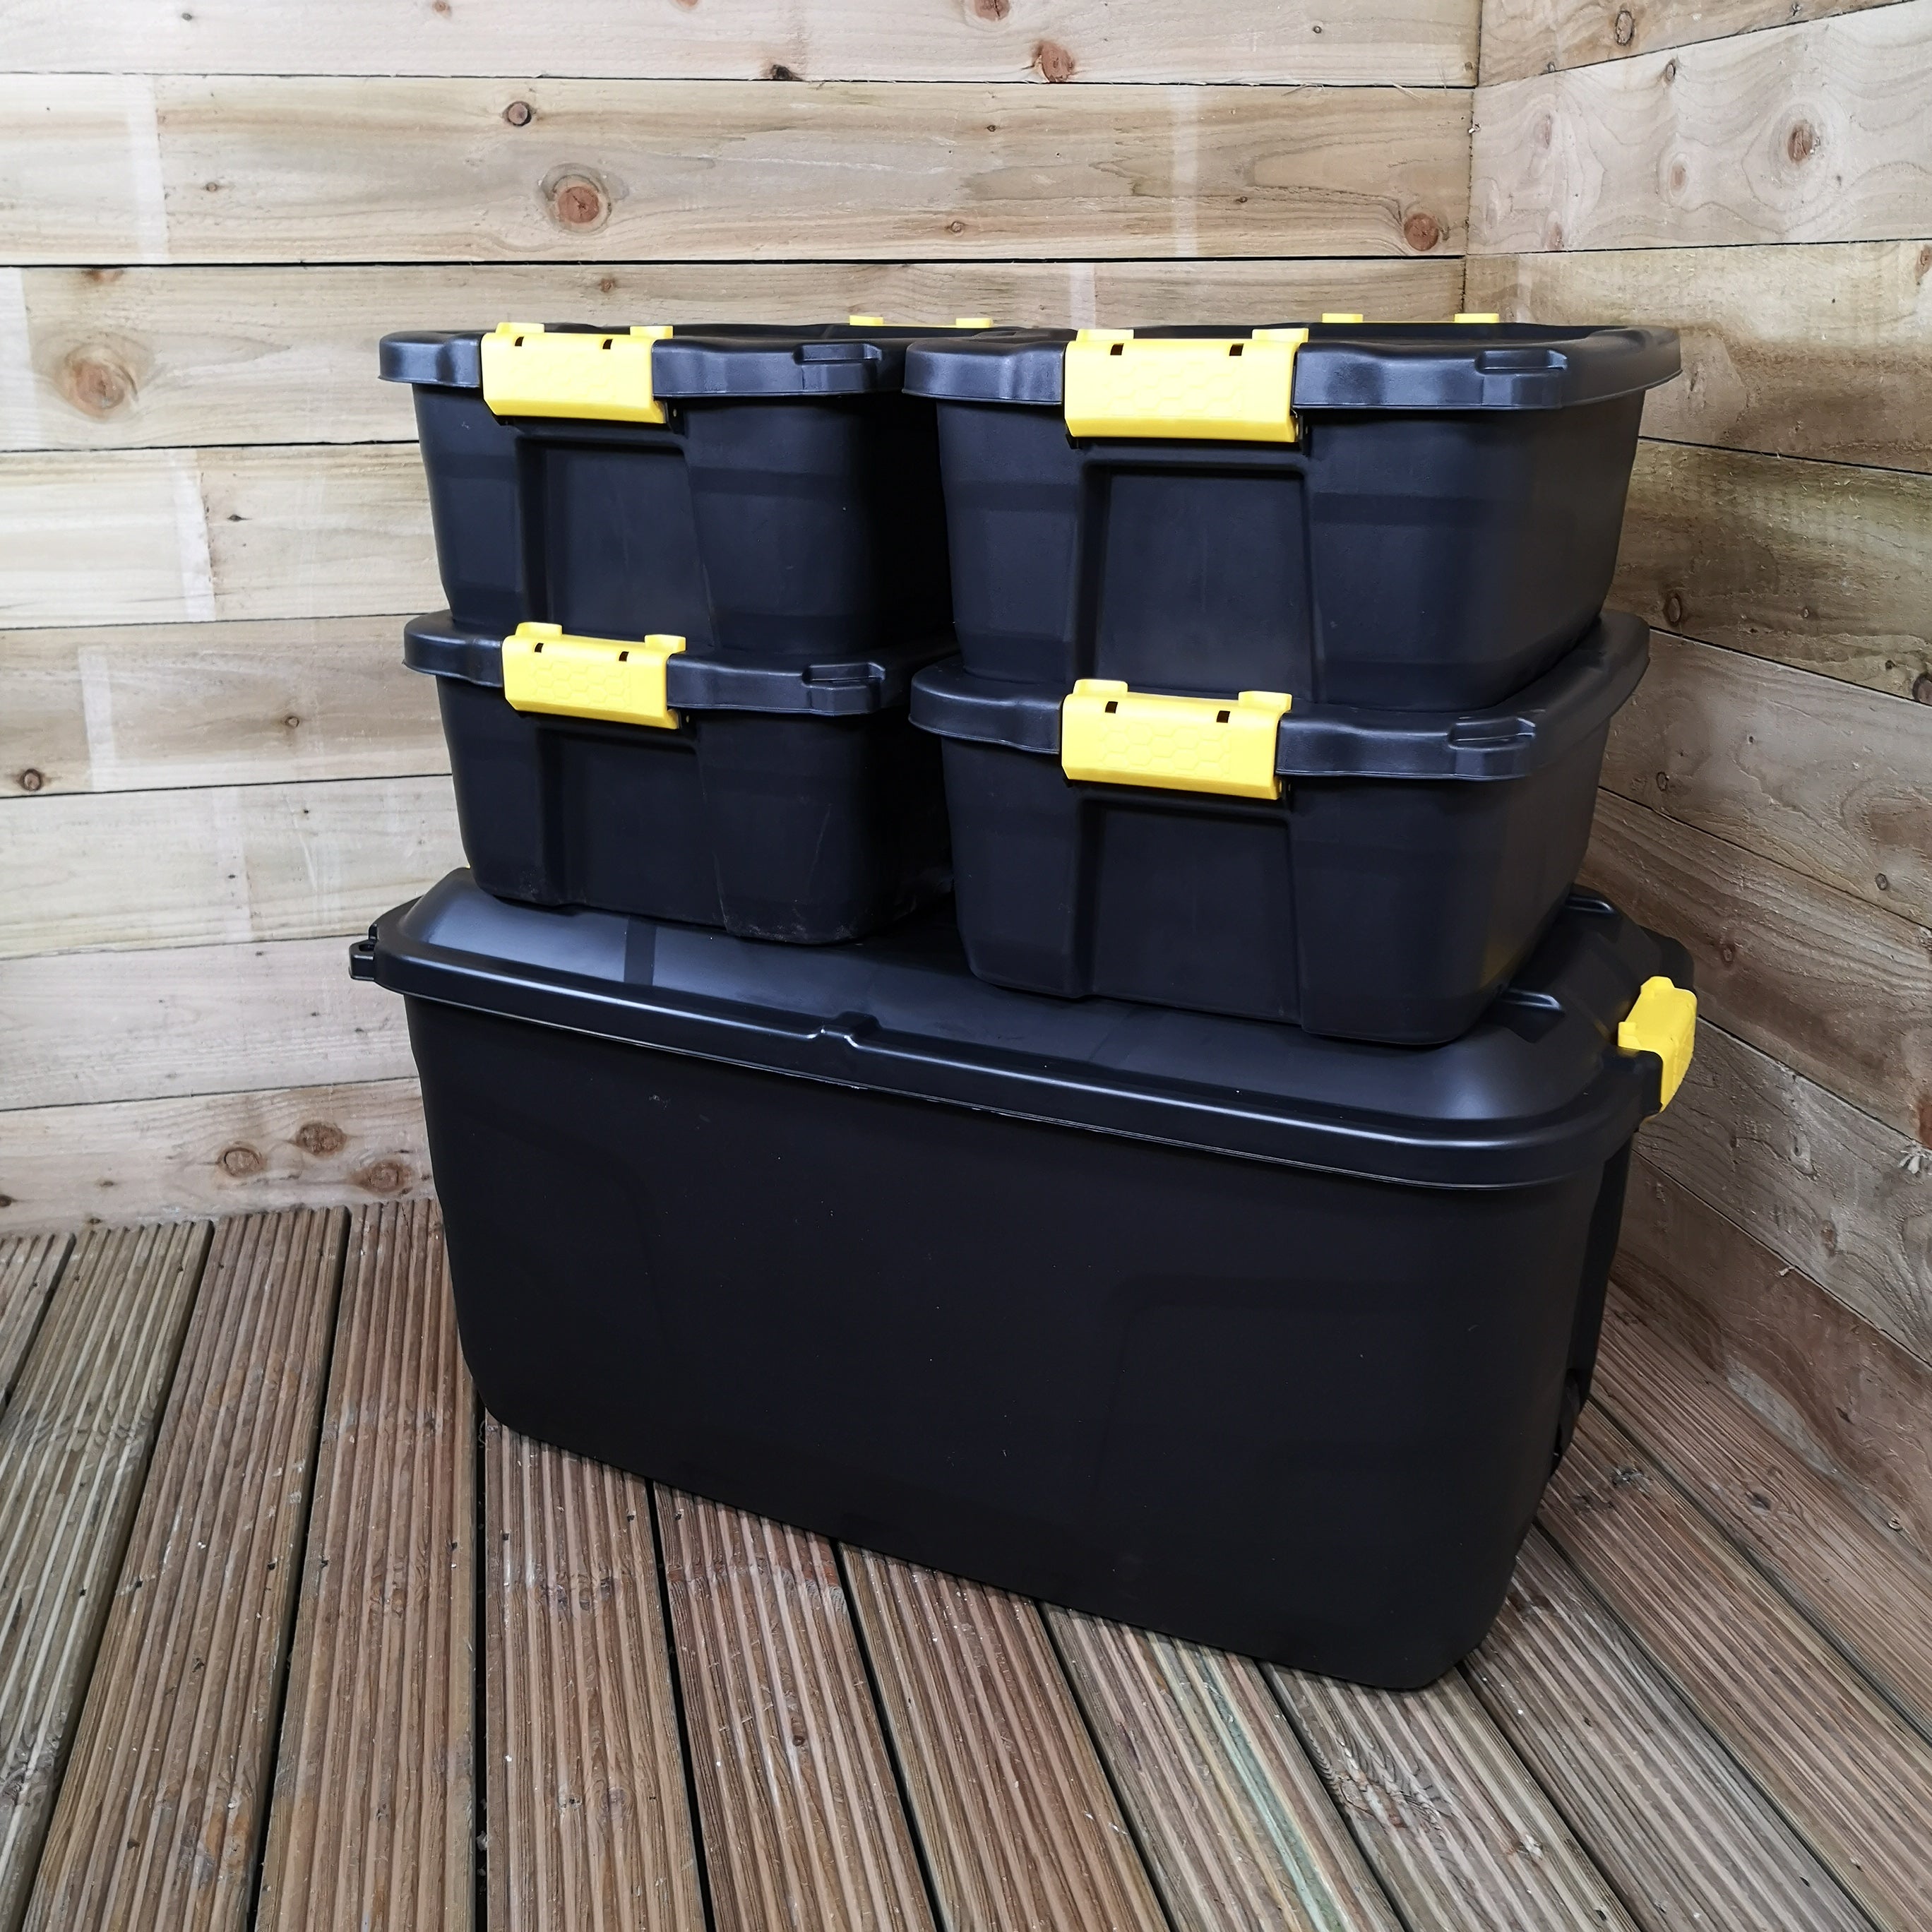 1 x 145L AND 4 x 24L Heavy Duty Trunks 1 on Wheels Sturdy, Lockable, Stackable and Nestable Design Storage Chest with Clips in Black